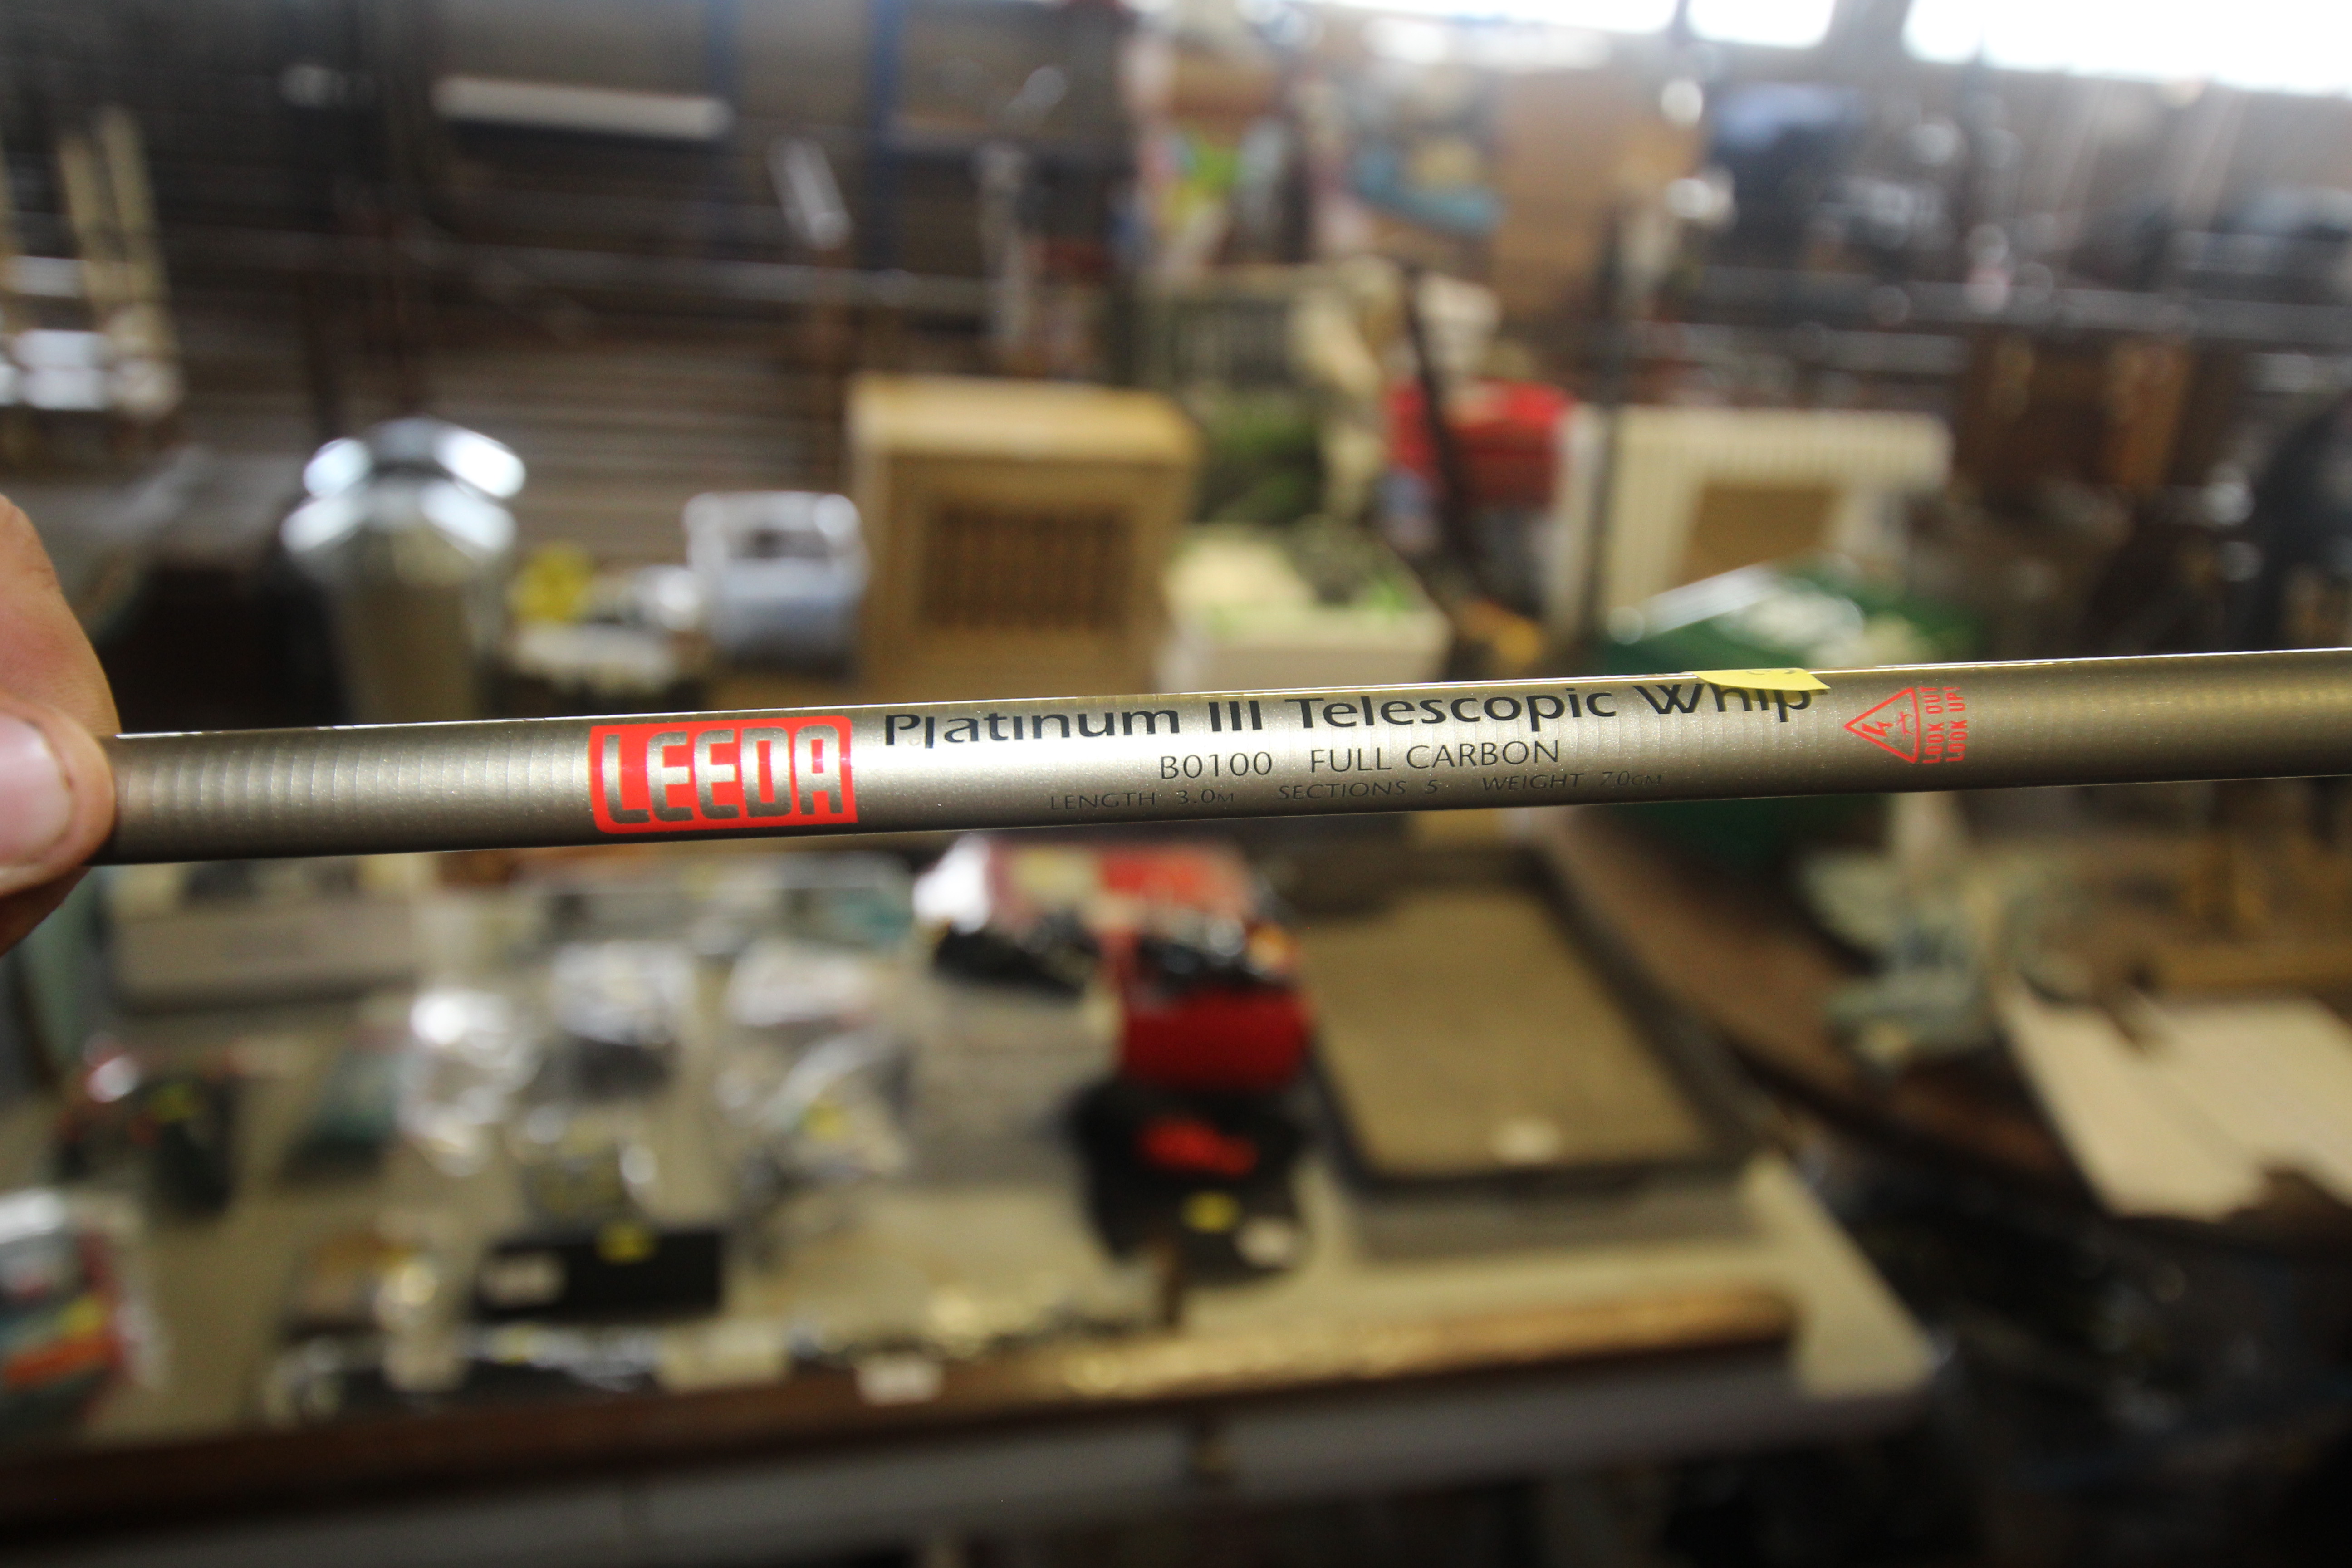 A Leeder Platinum III telescopic finish whip (3m) with carry bag - Image 2 of 2